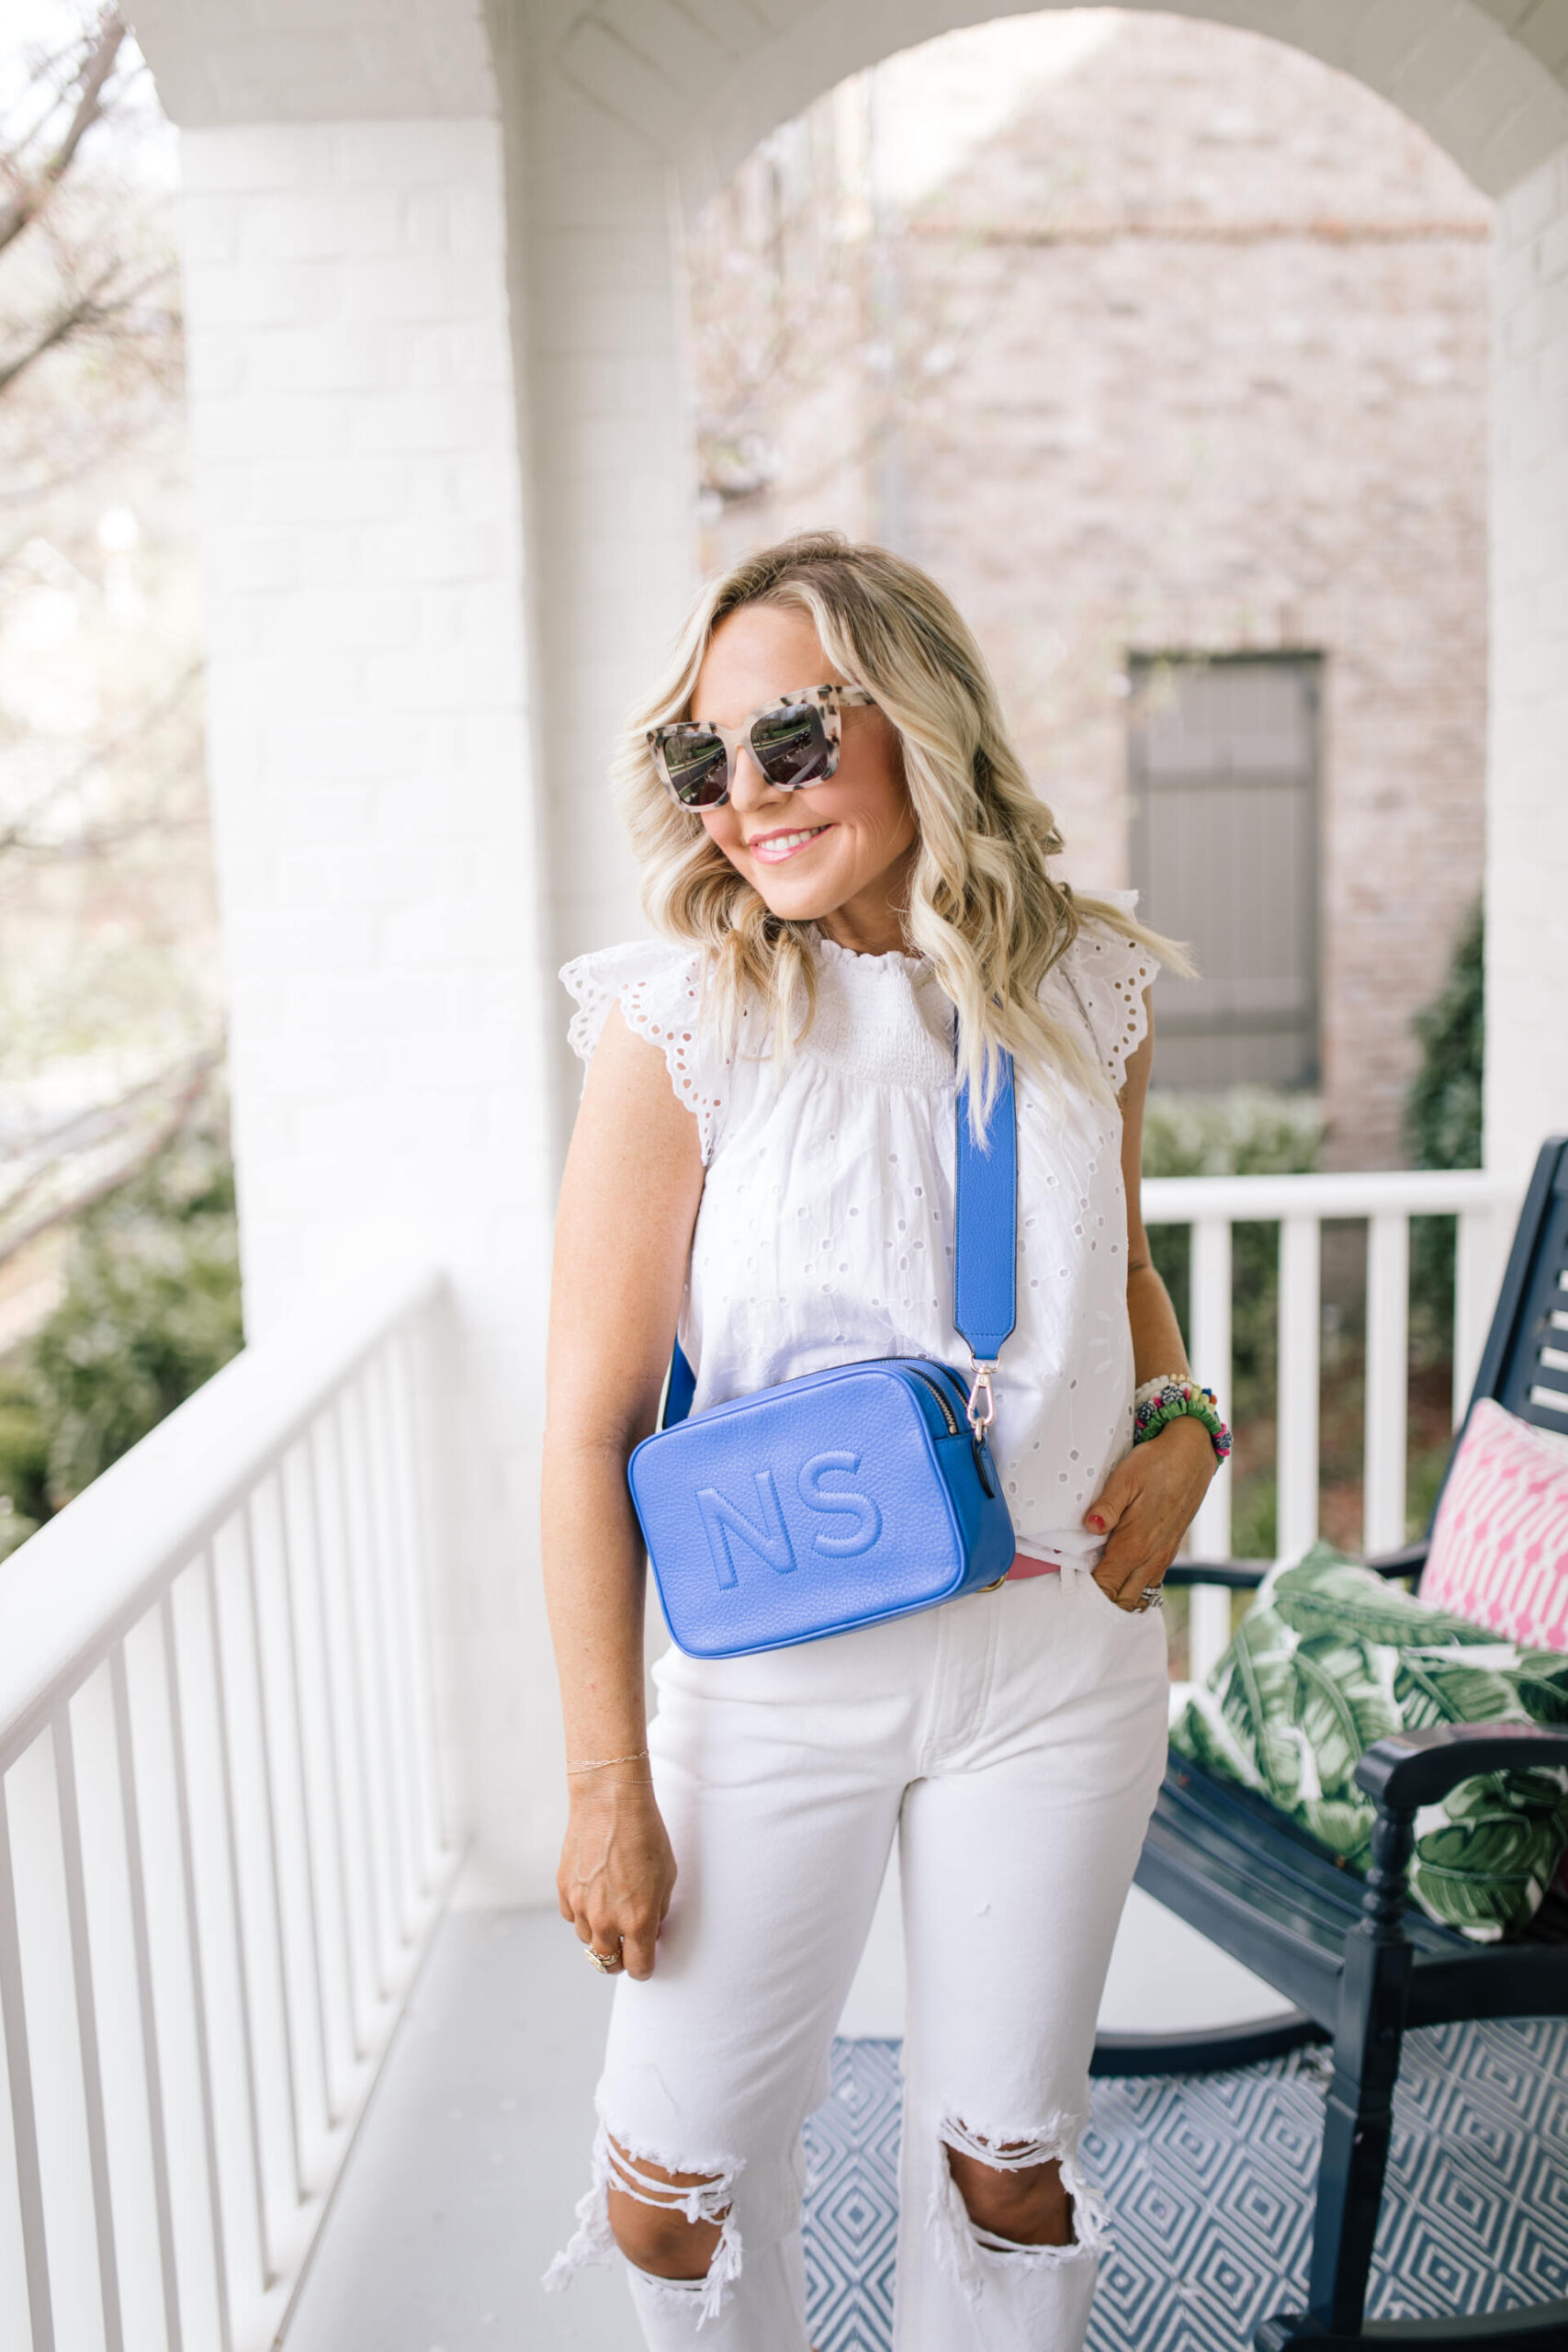 diff eyewear sunglasses styled by top Nashville fashion blogger, Hello Happiness.